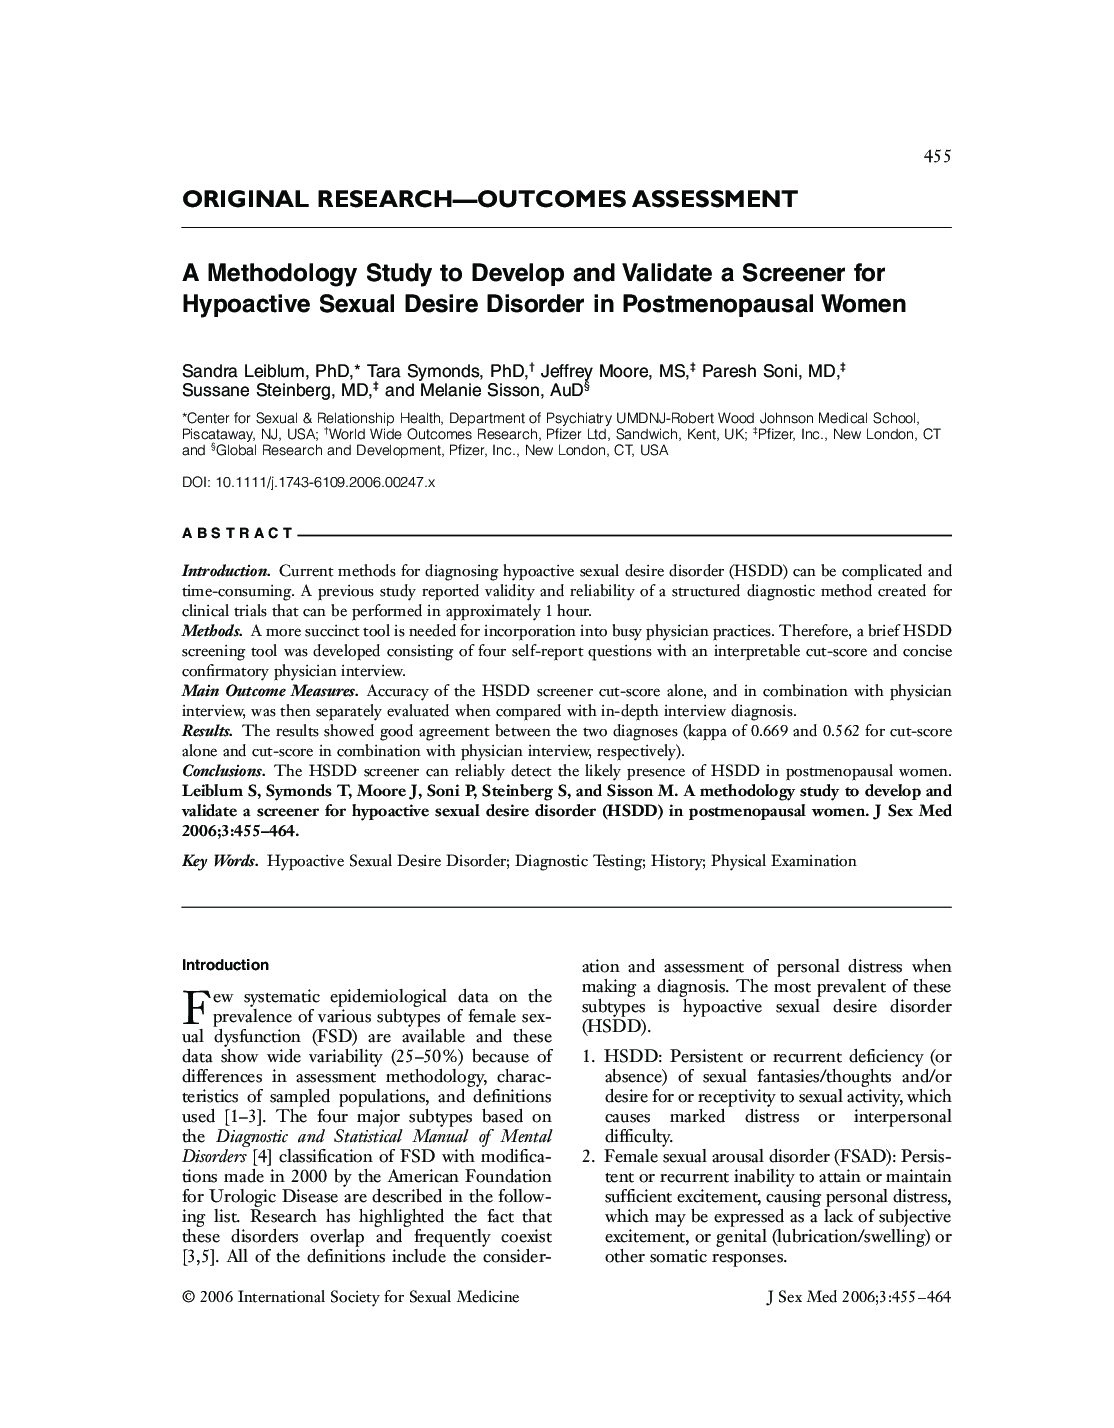 ORIGINAL RESEARCH-OUTCOMES ASSESSMENT: A Methodology Study to Develop and Validate a Screener for Hypoactive Sexual Desire Disorder in Postmenopausal Women